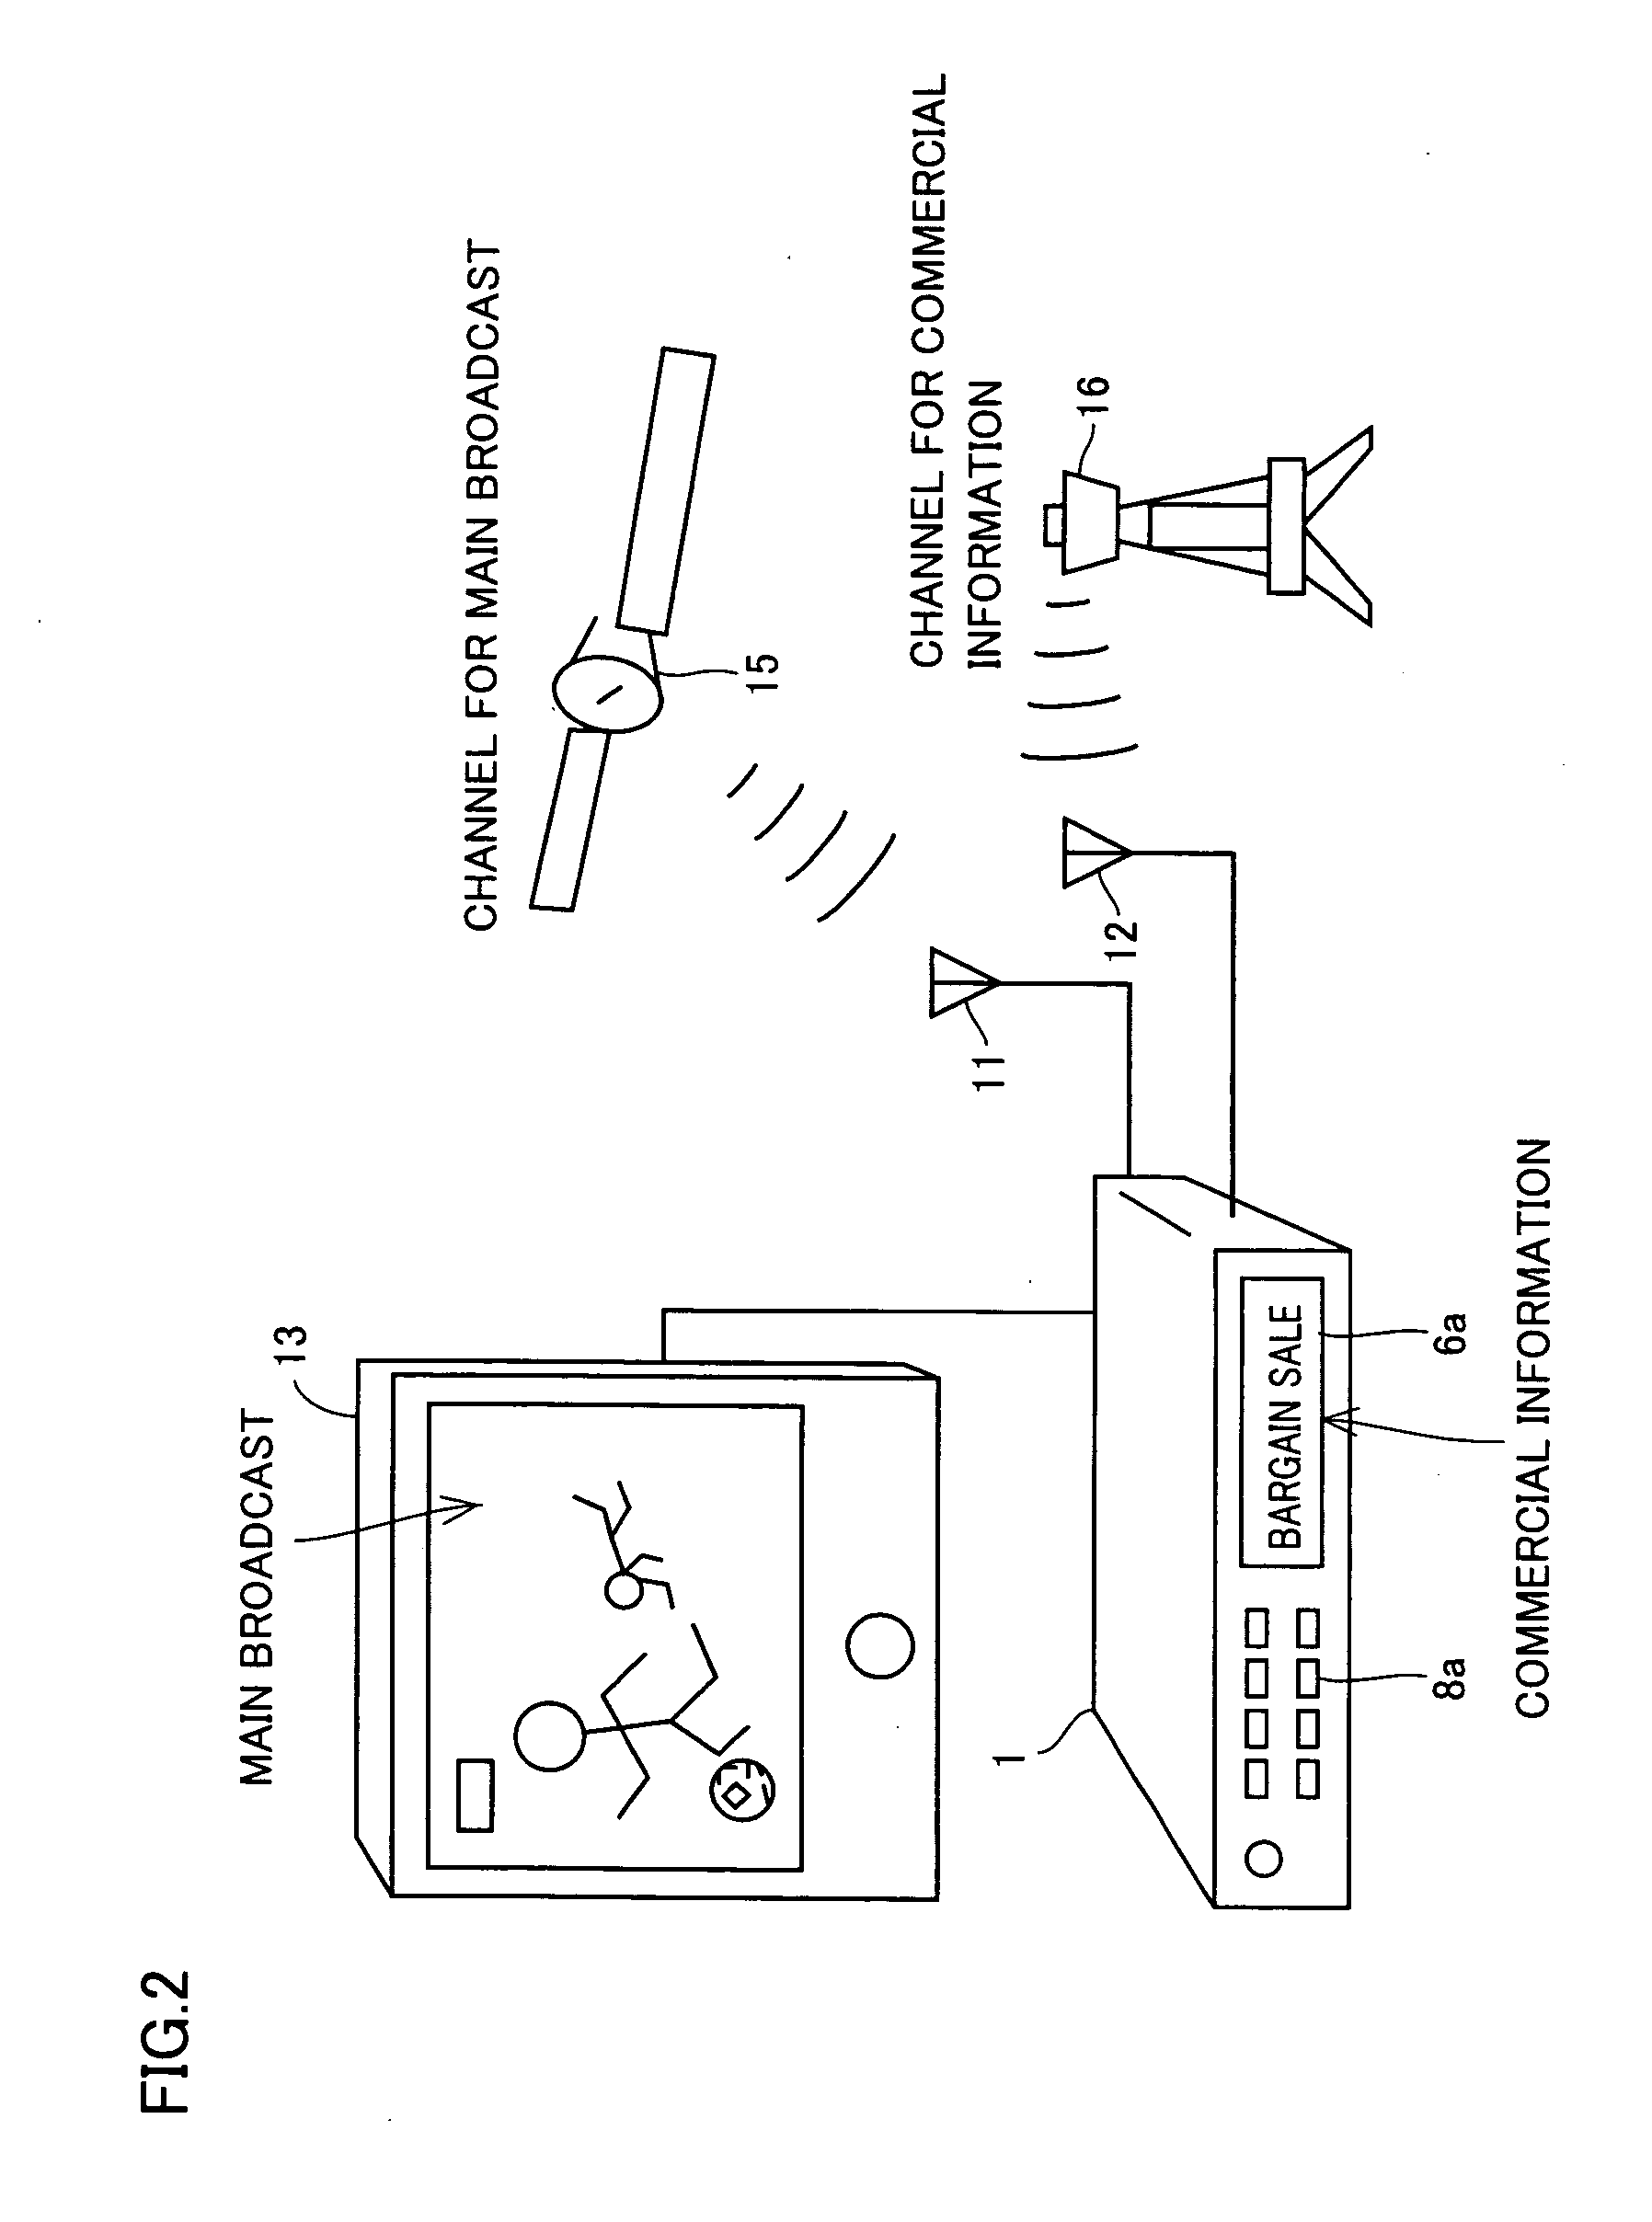 Video recording and reproducing apparatus having commercial skip mode